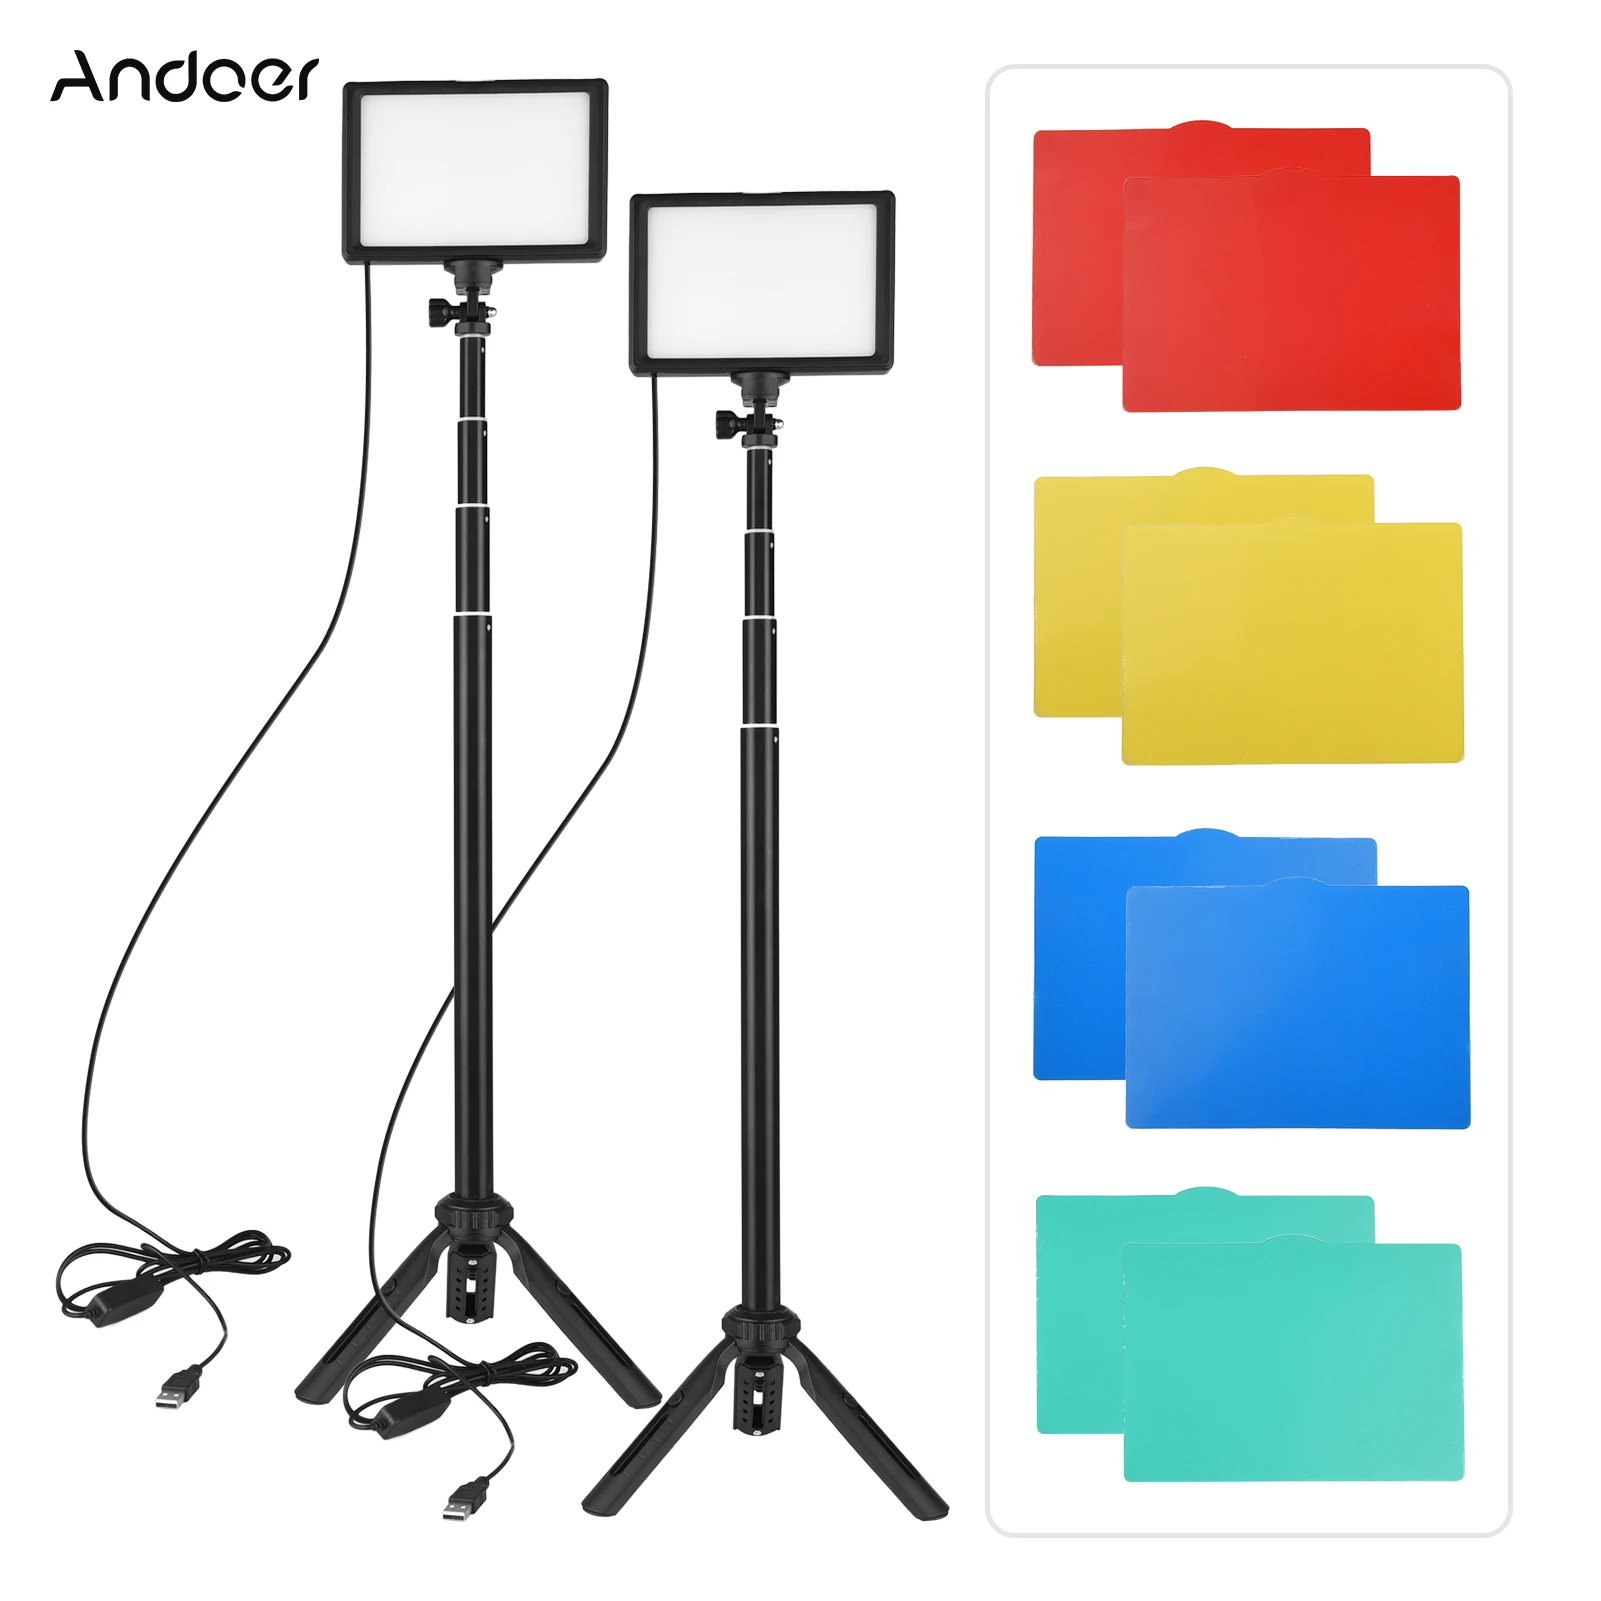 Andoer 2pcs USB LED Video Light Kit Photography Lighting 3200K-5600K 120pcs Beads 14-level Dimmable with 148cm/58in Tripod Stand